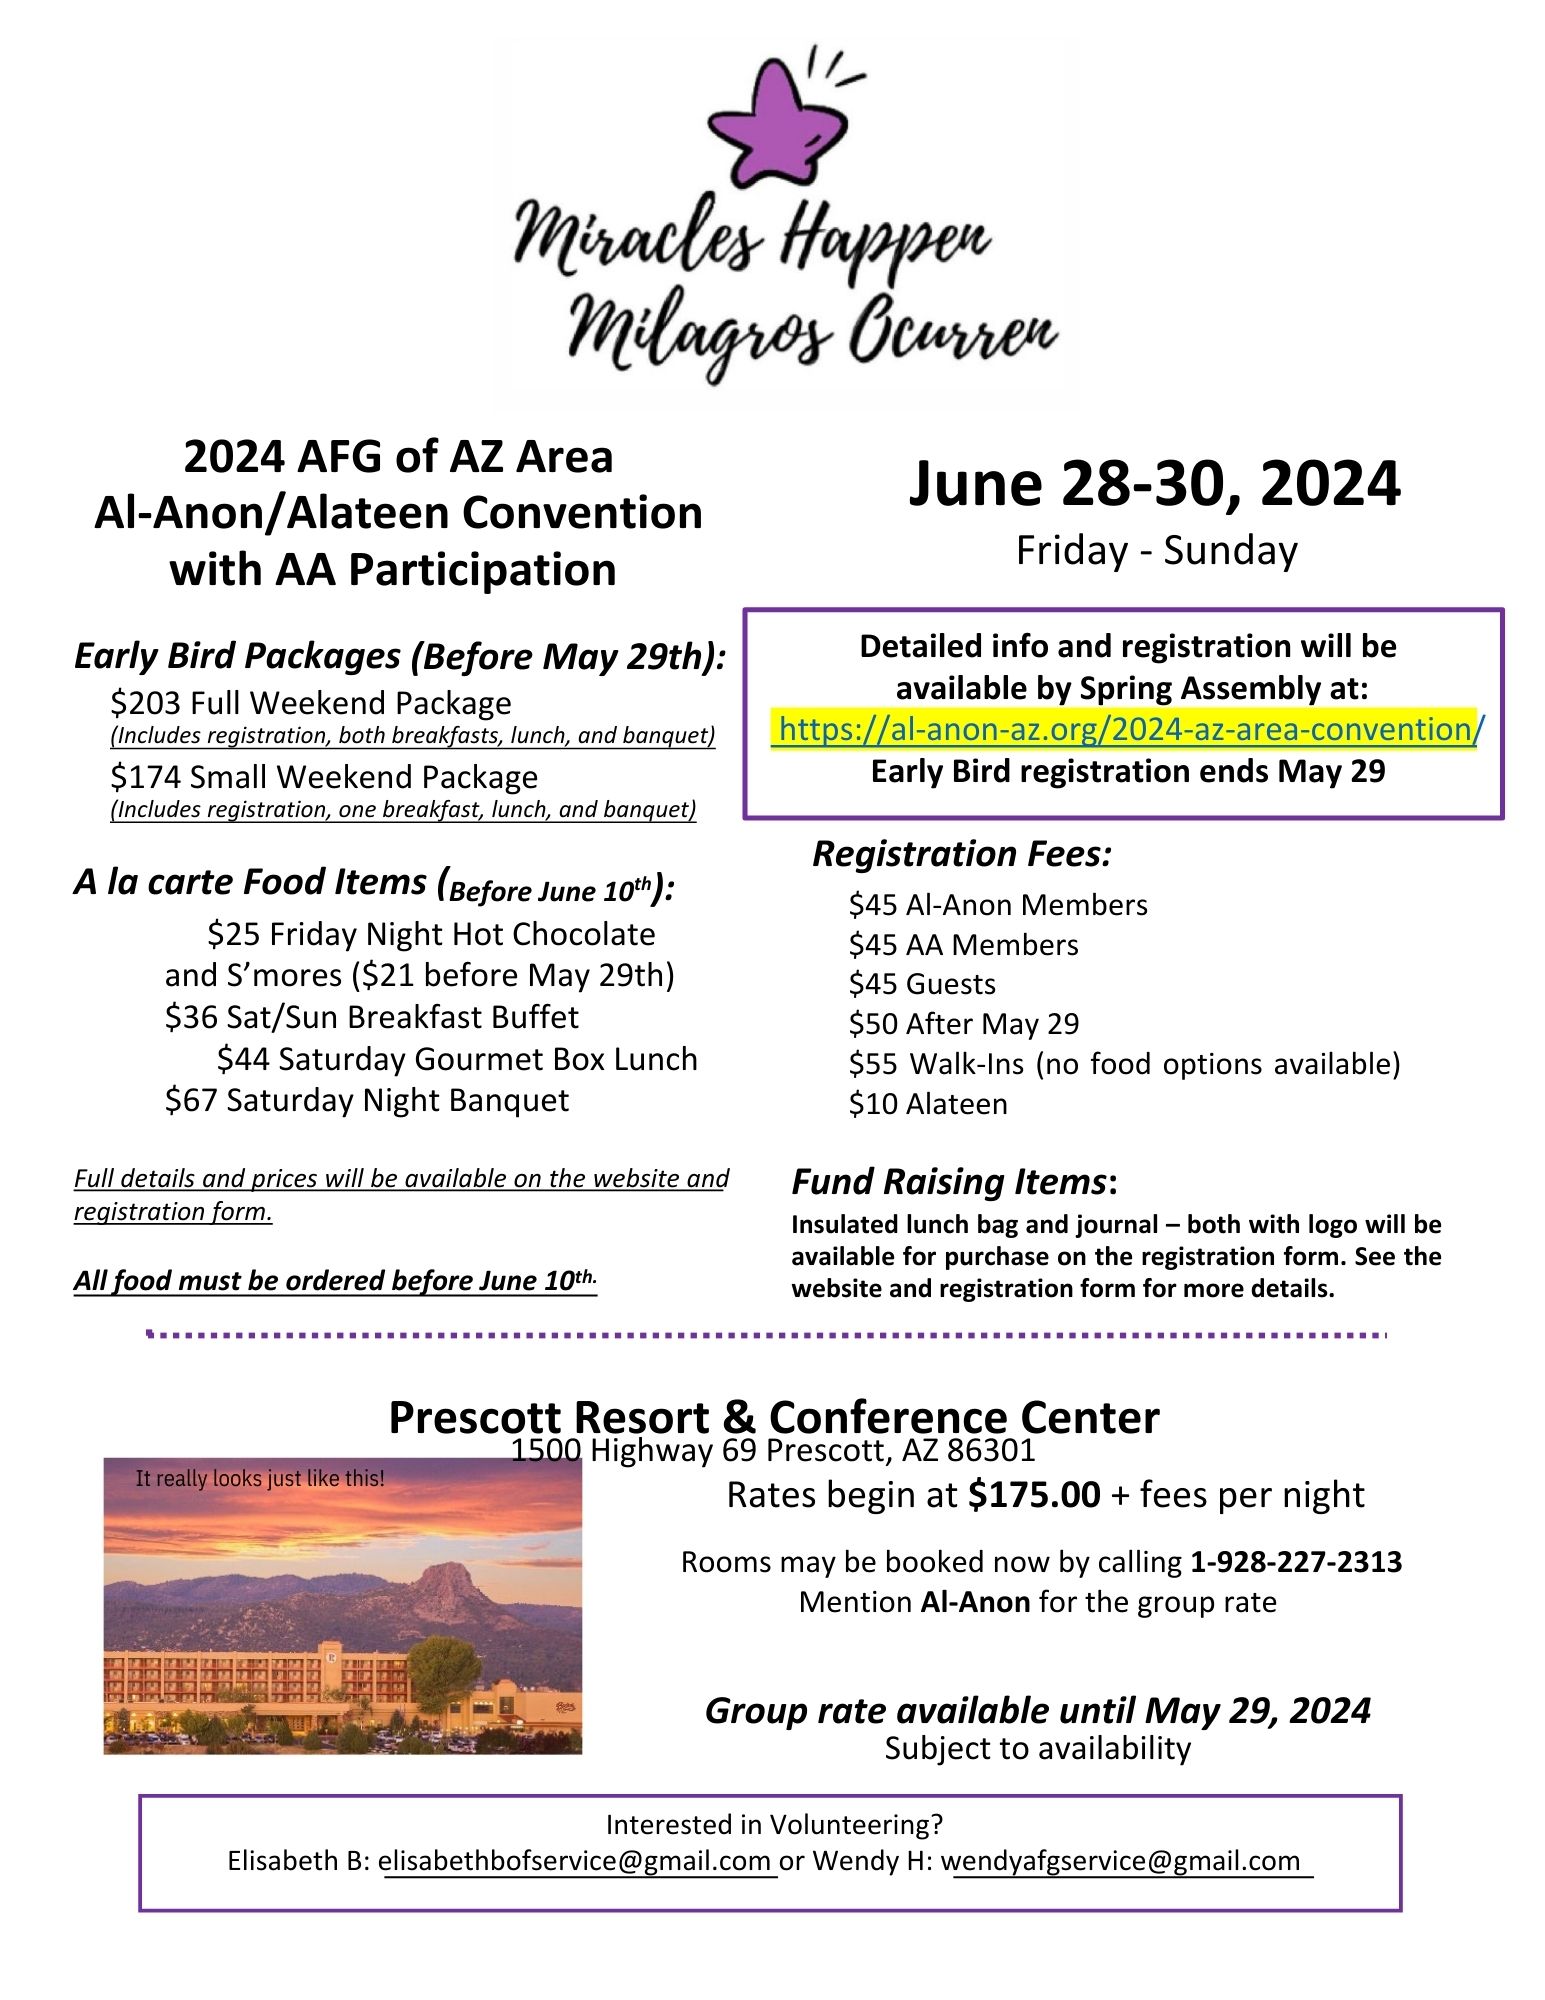 2024 AFG of AZ Area Al-Anon/Alateen Convention w/ AA Participation